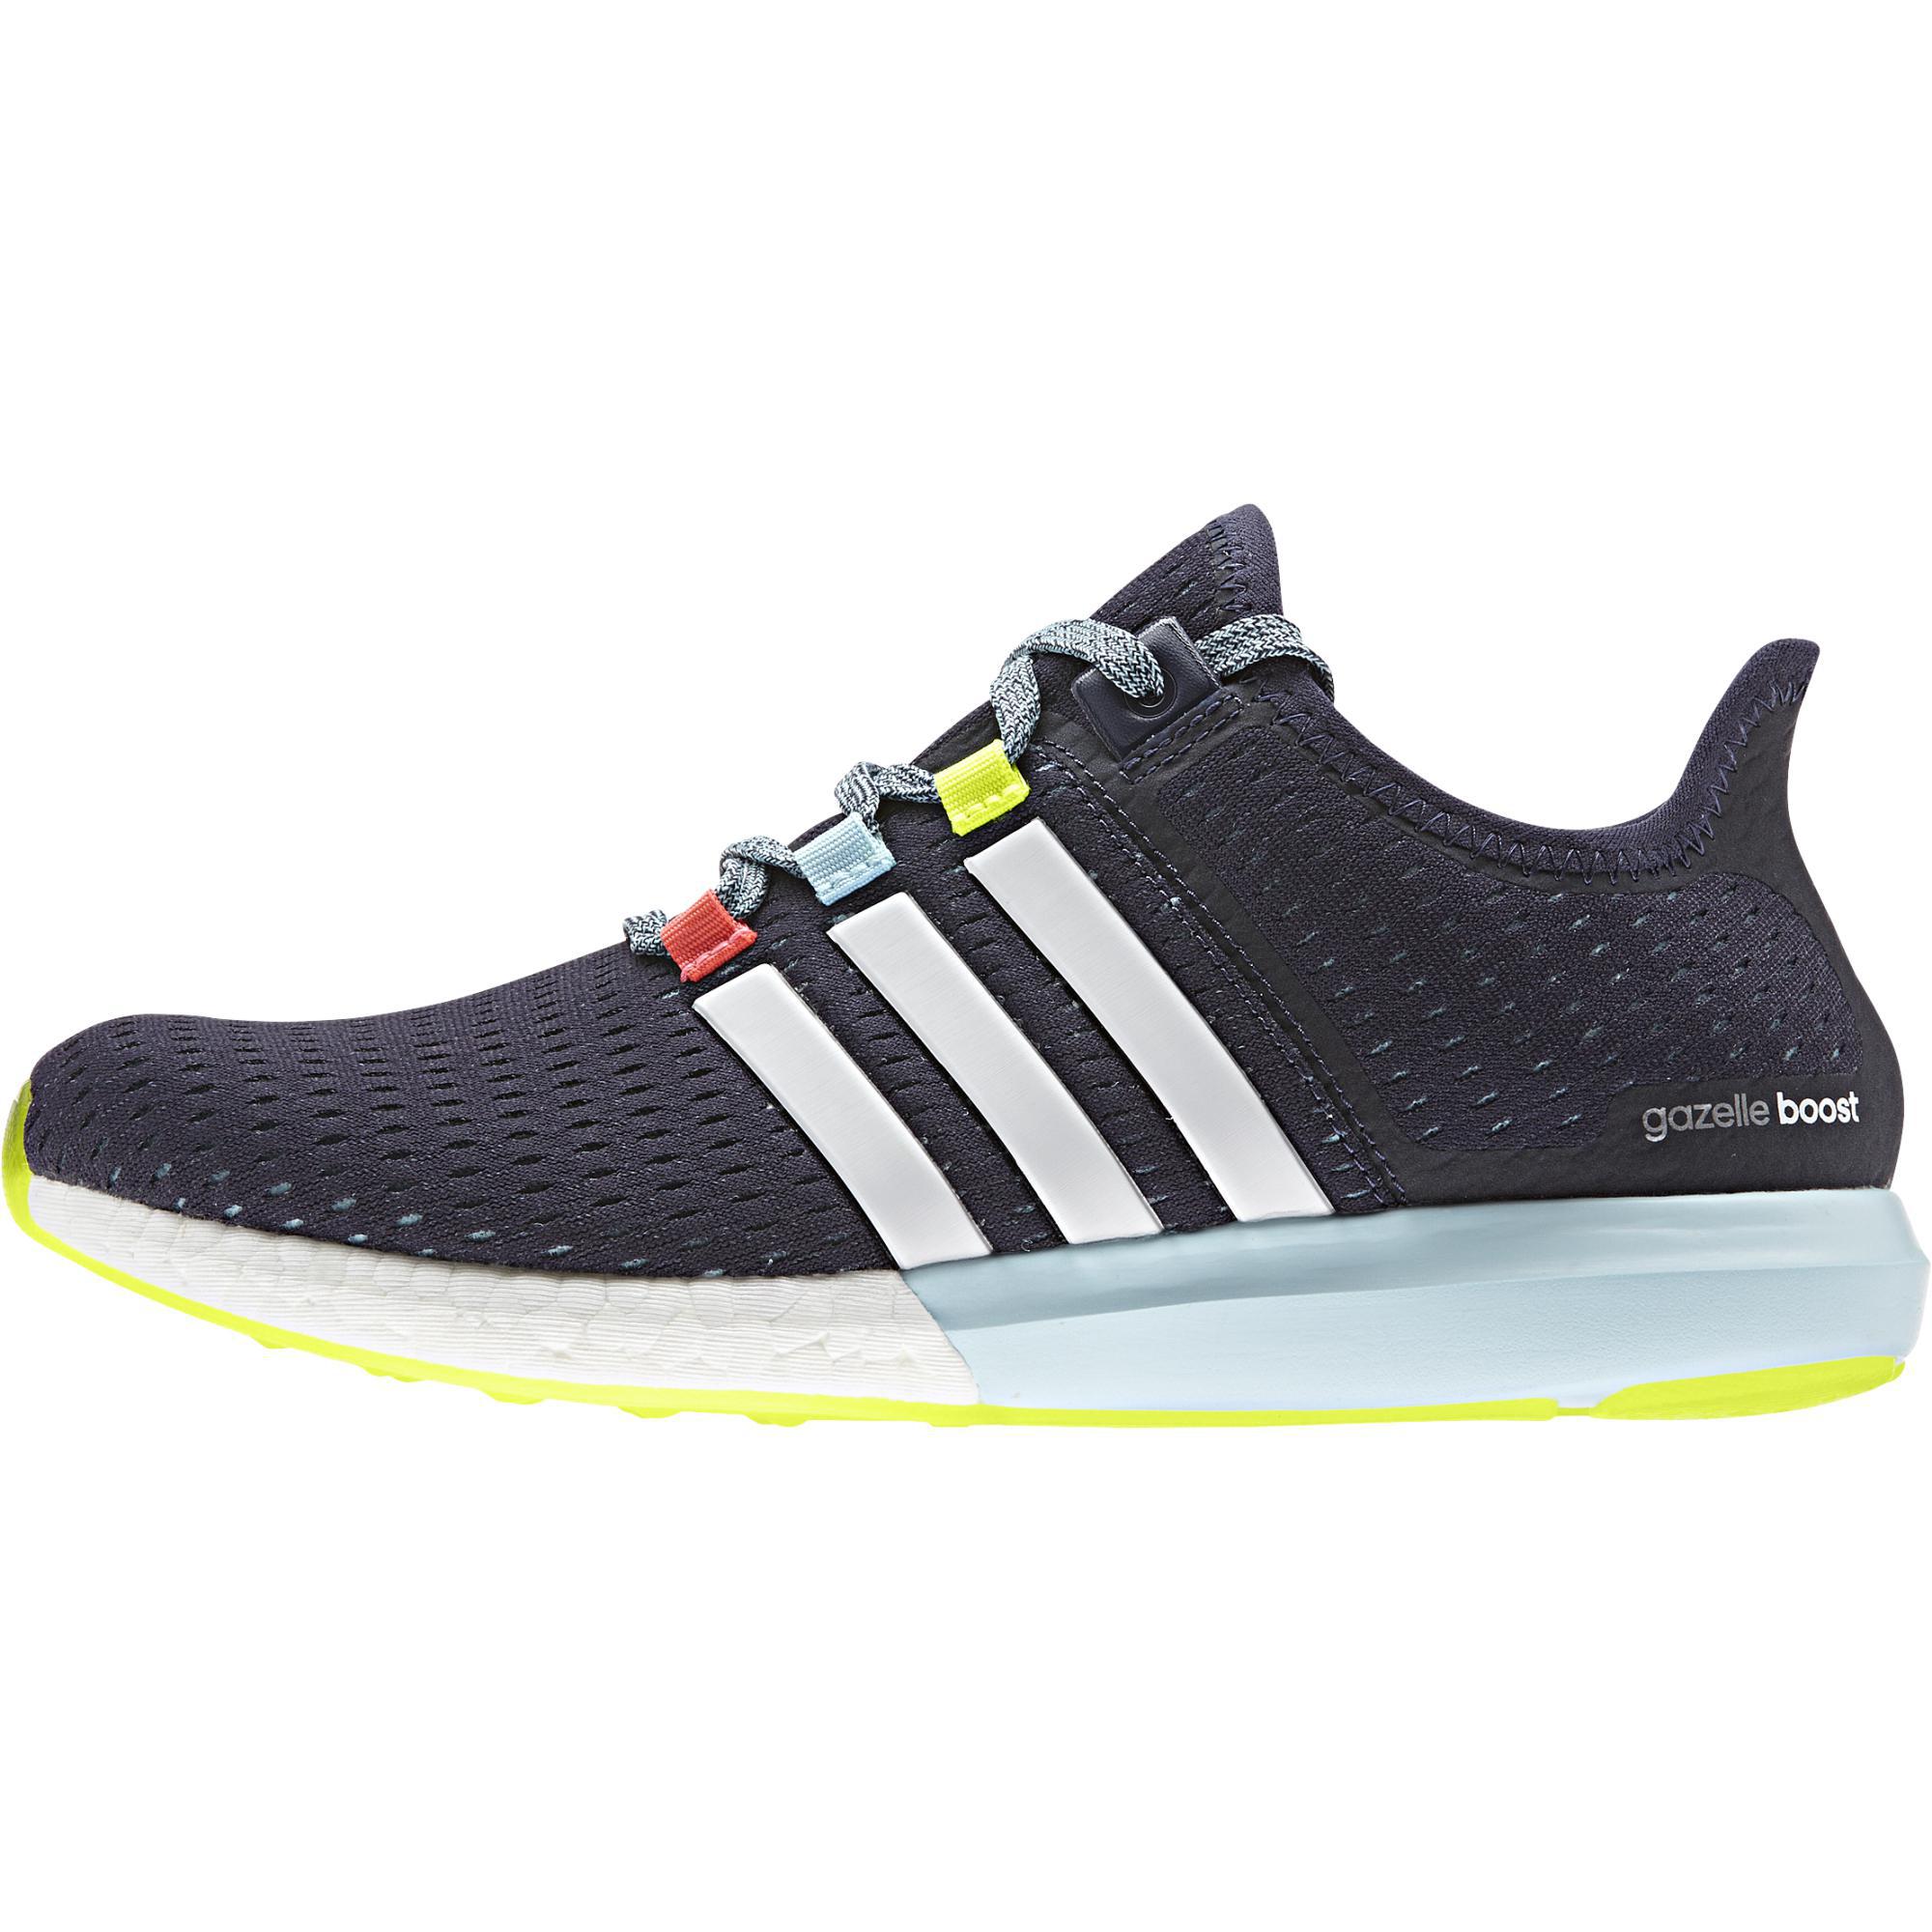 adidas climachill gazelle boost mens trainers